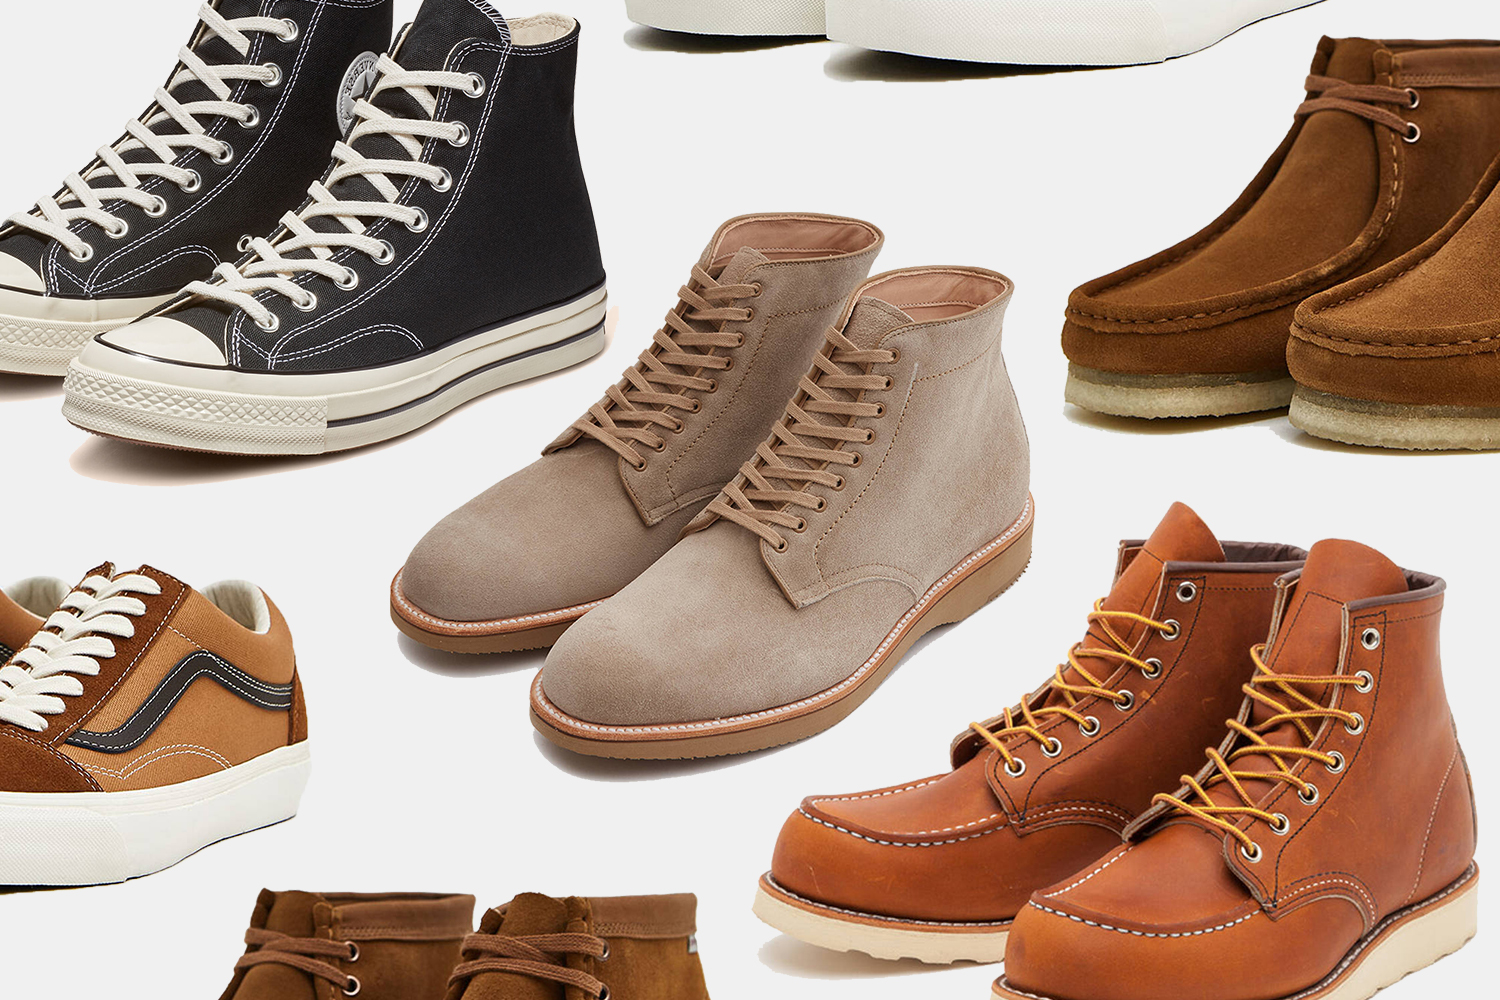 shoe brands that start with c